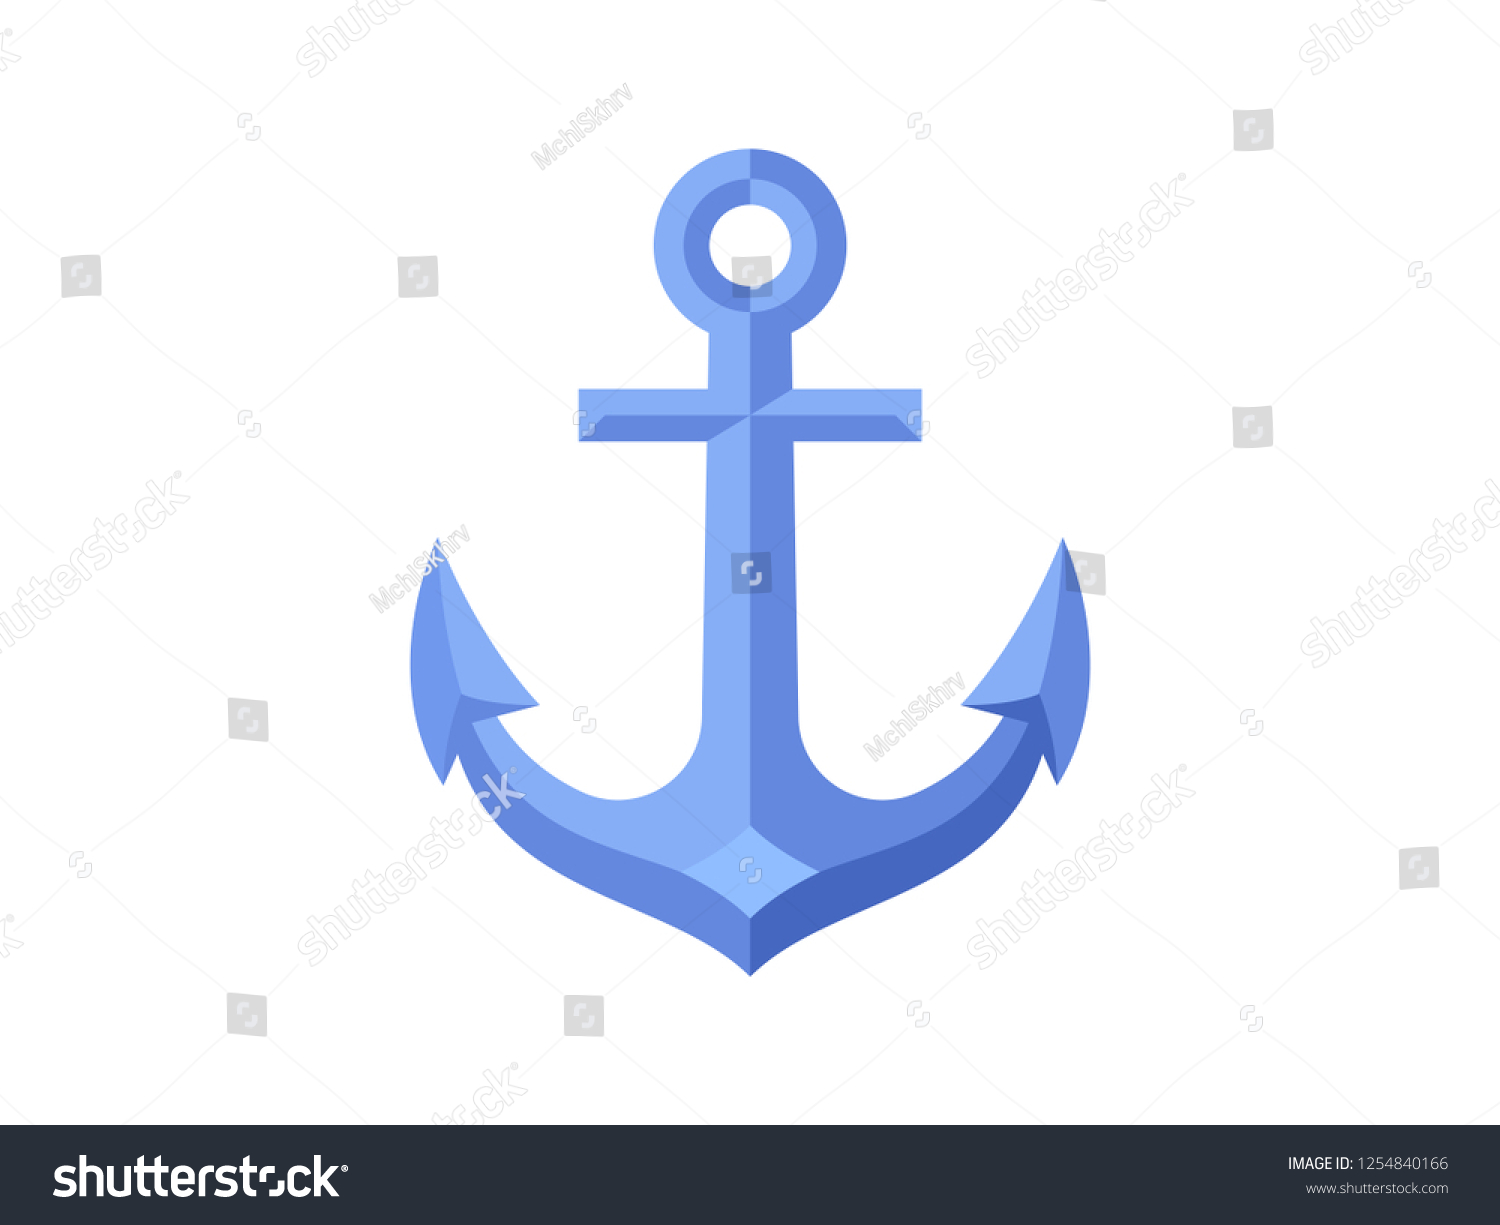 SVG of Nautical anchor icon isolated on white background. Flat design. Vector illustration svg